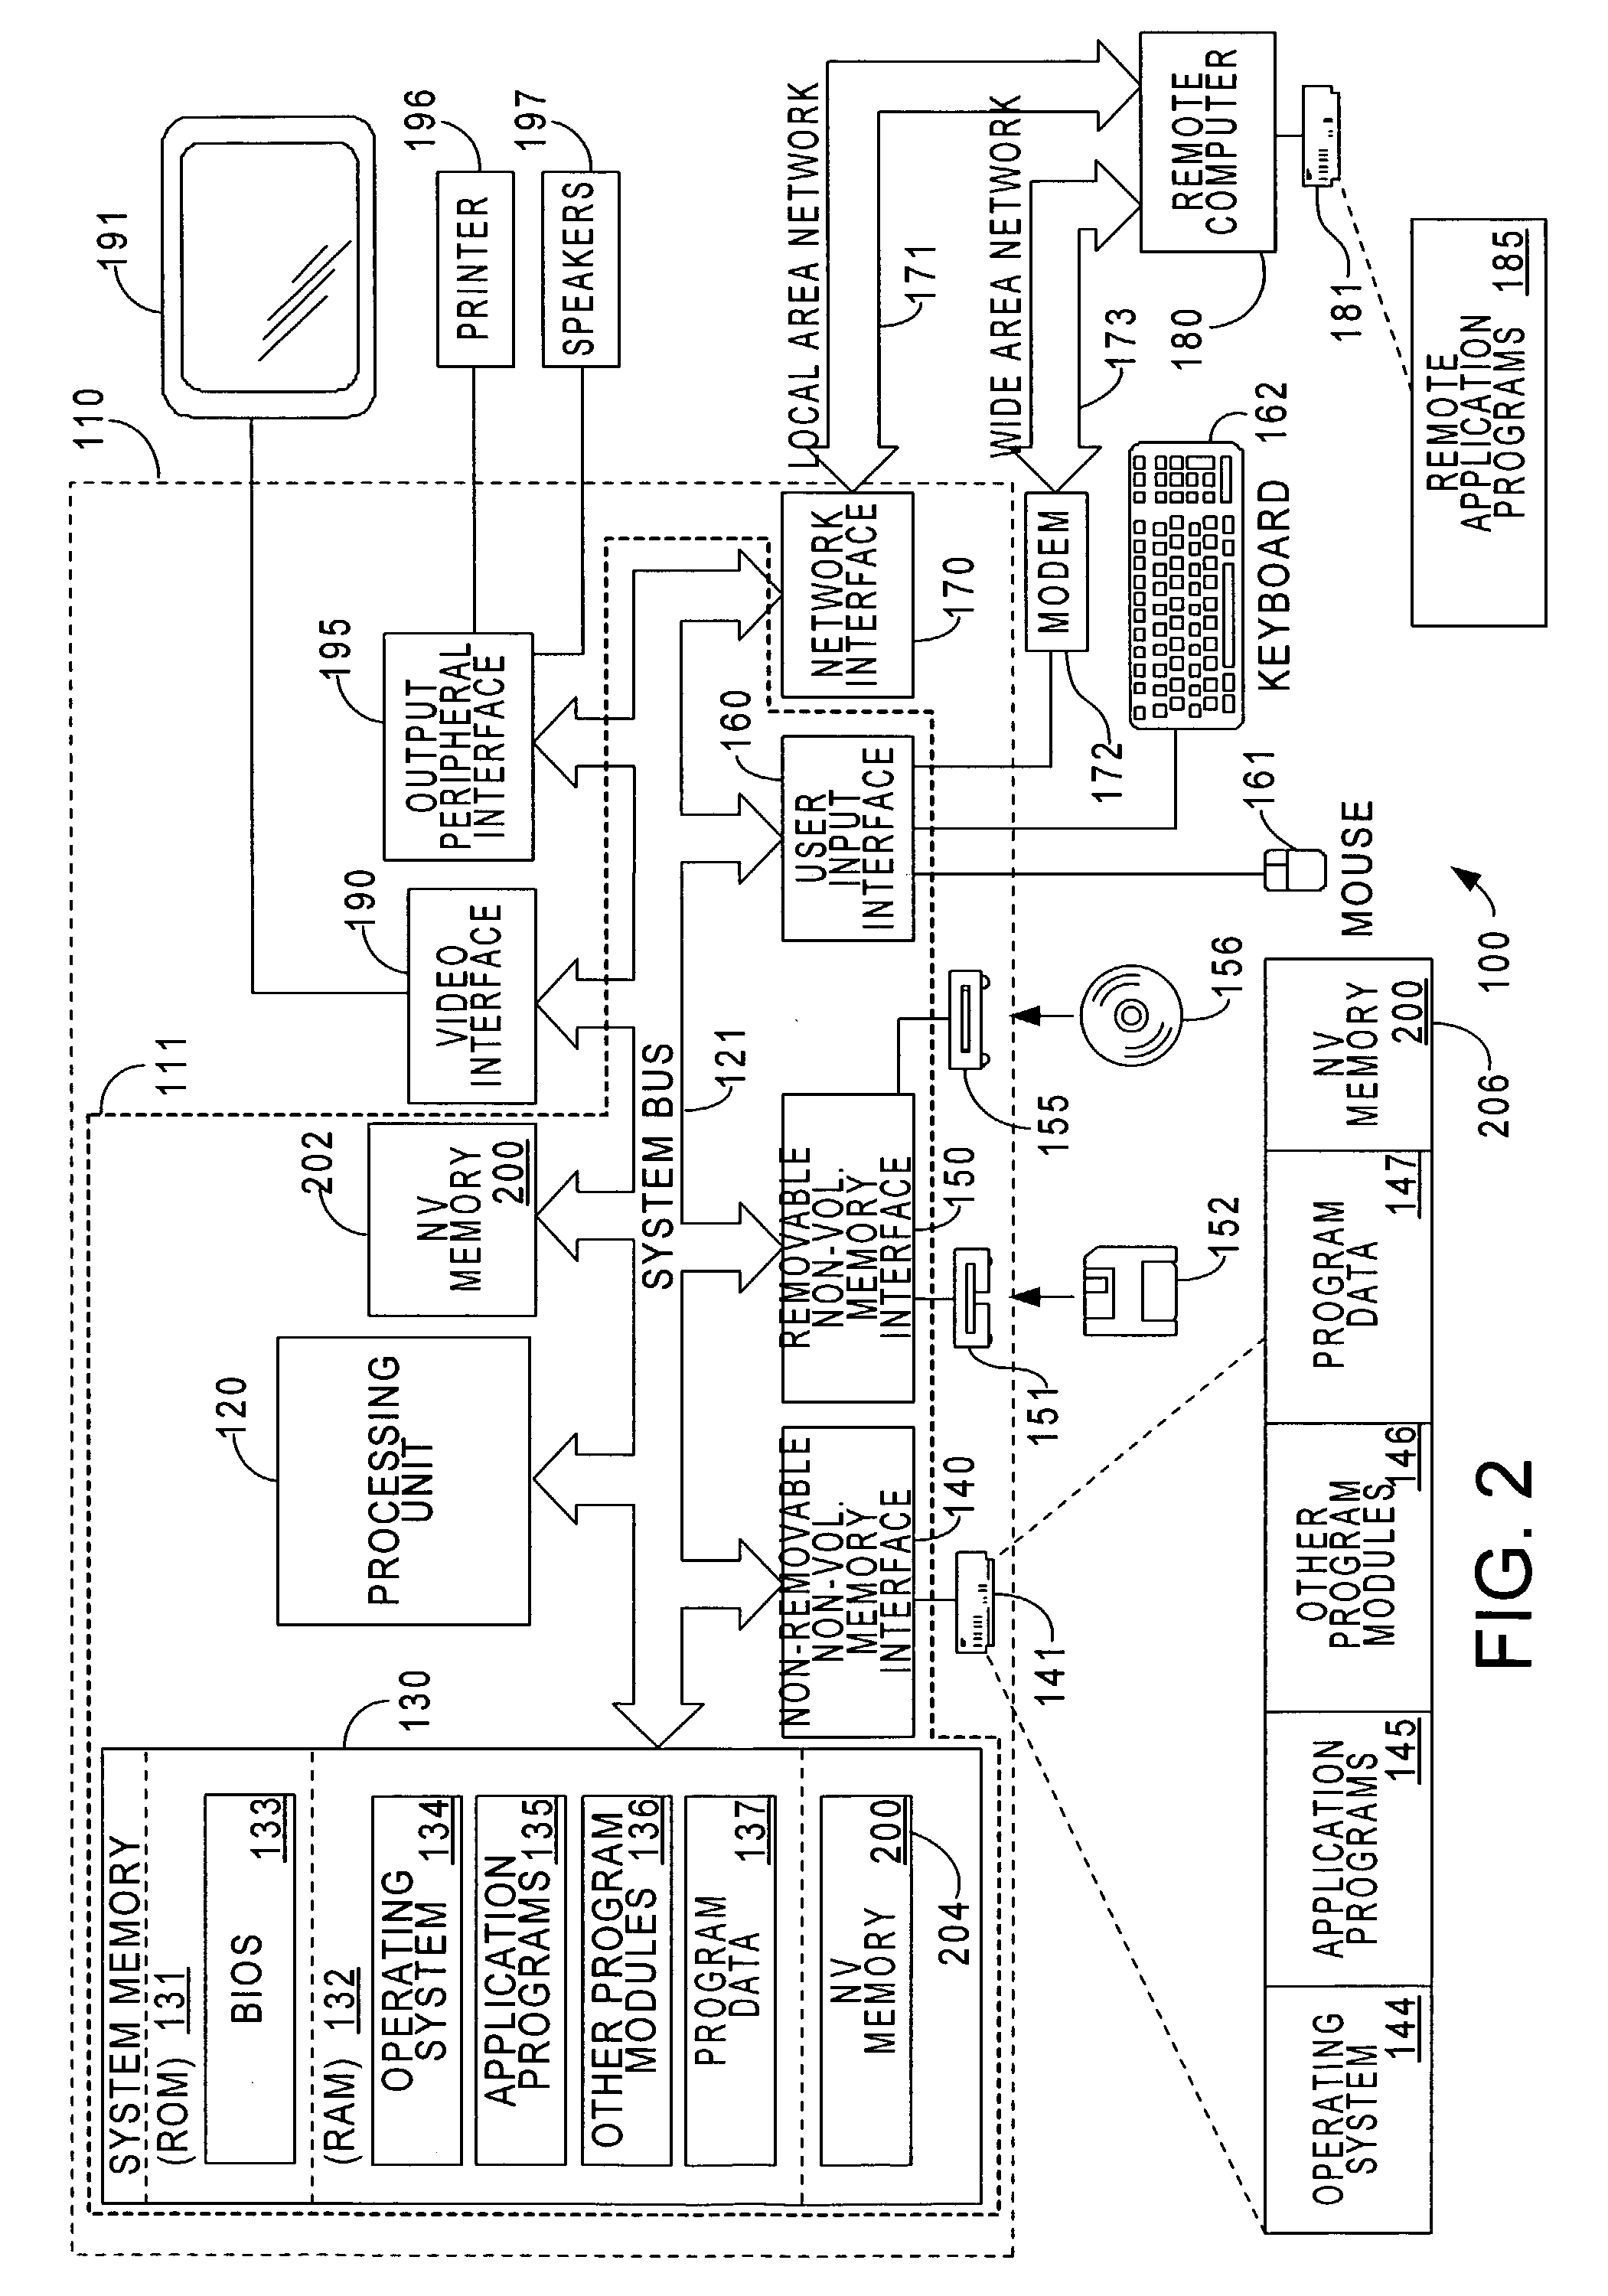 Method and apparatus to reduce power consumption and improve read/write performance of hard disk drives using non-volatile memory